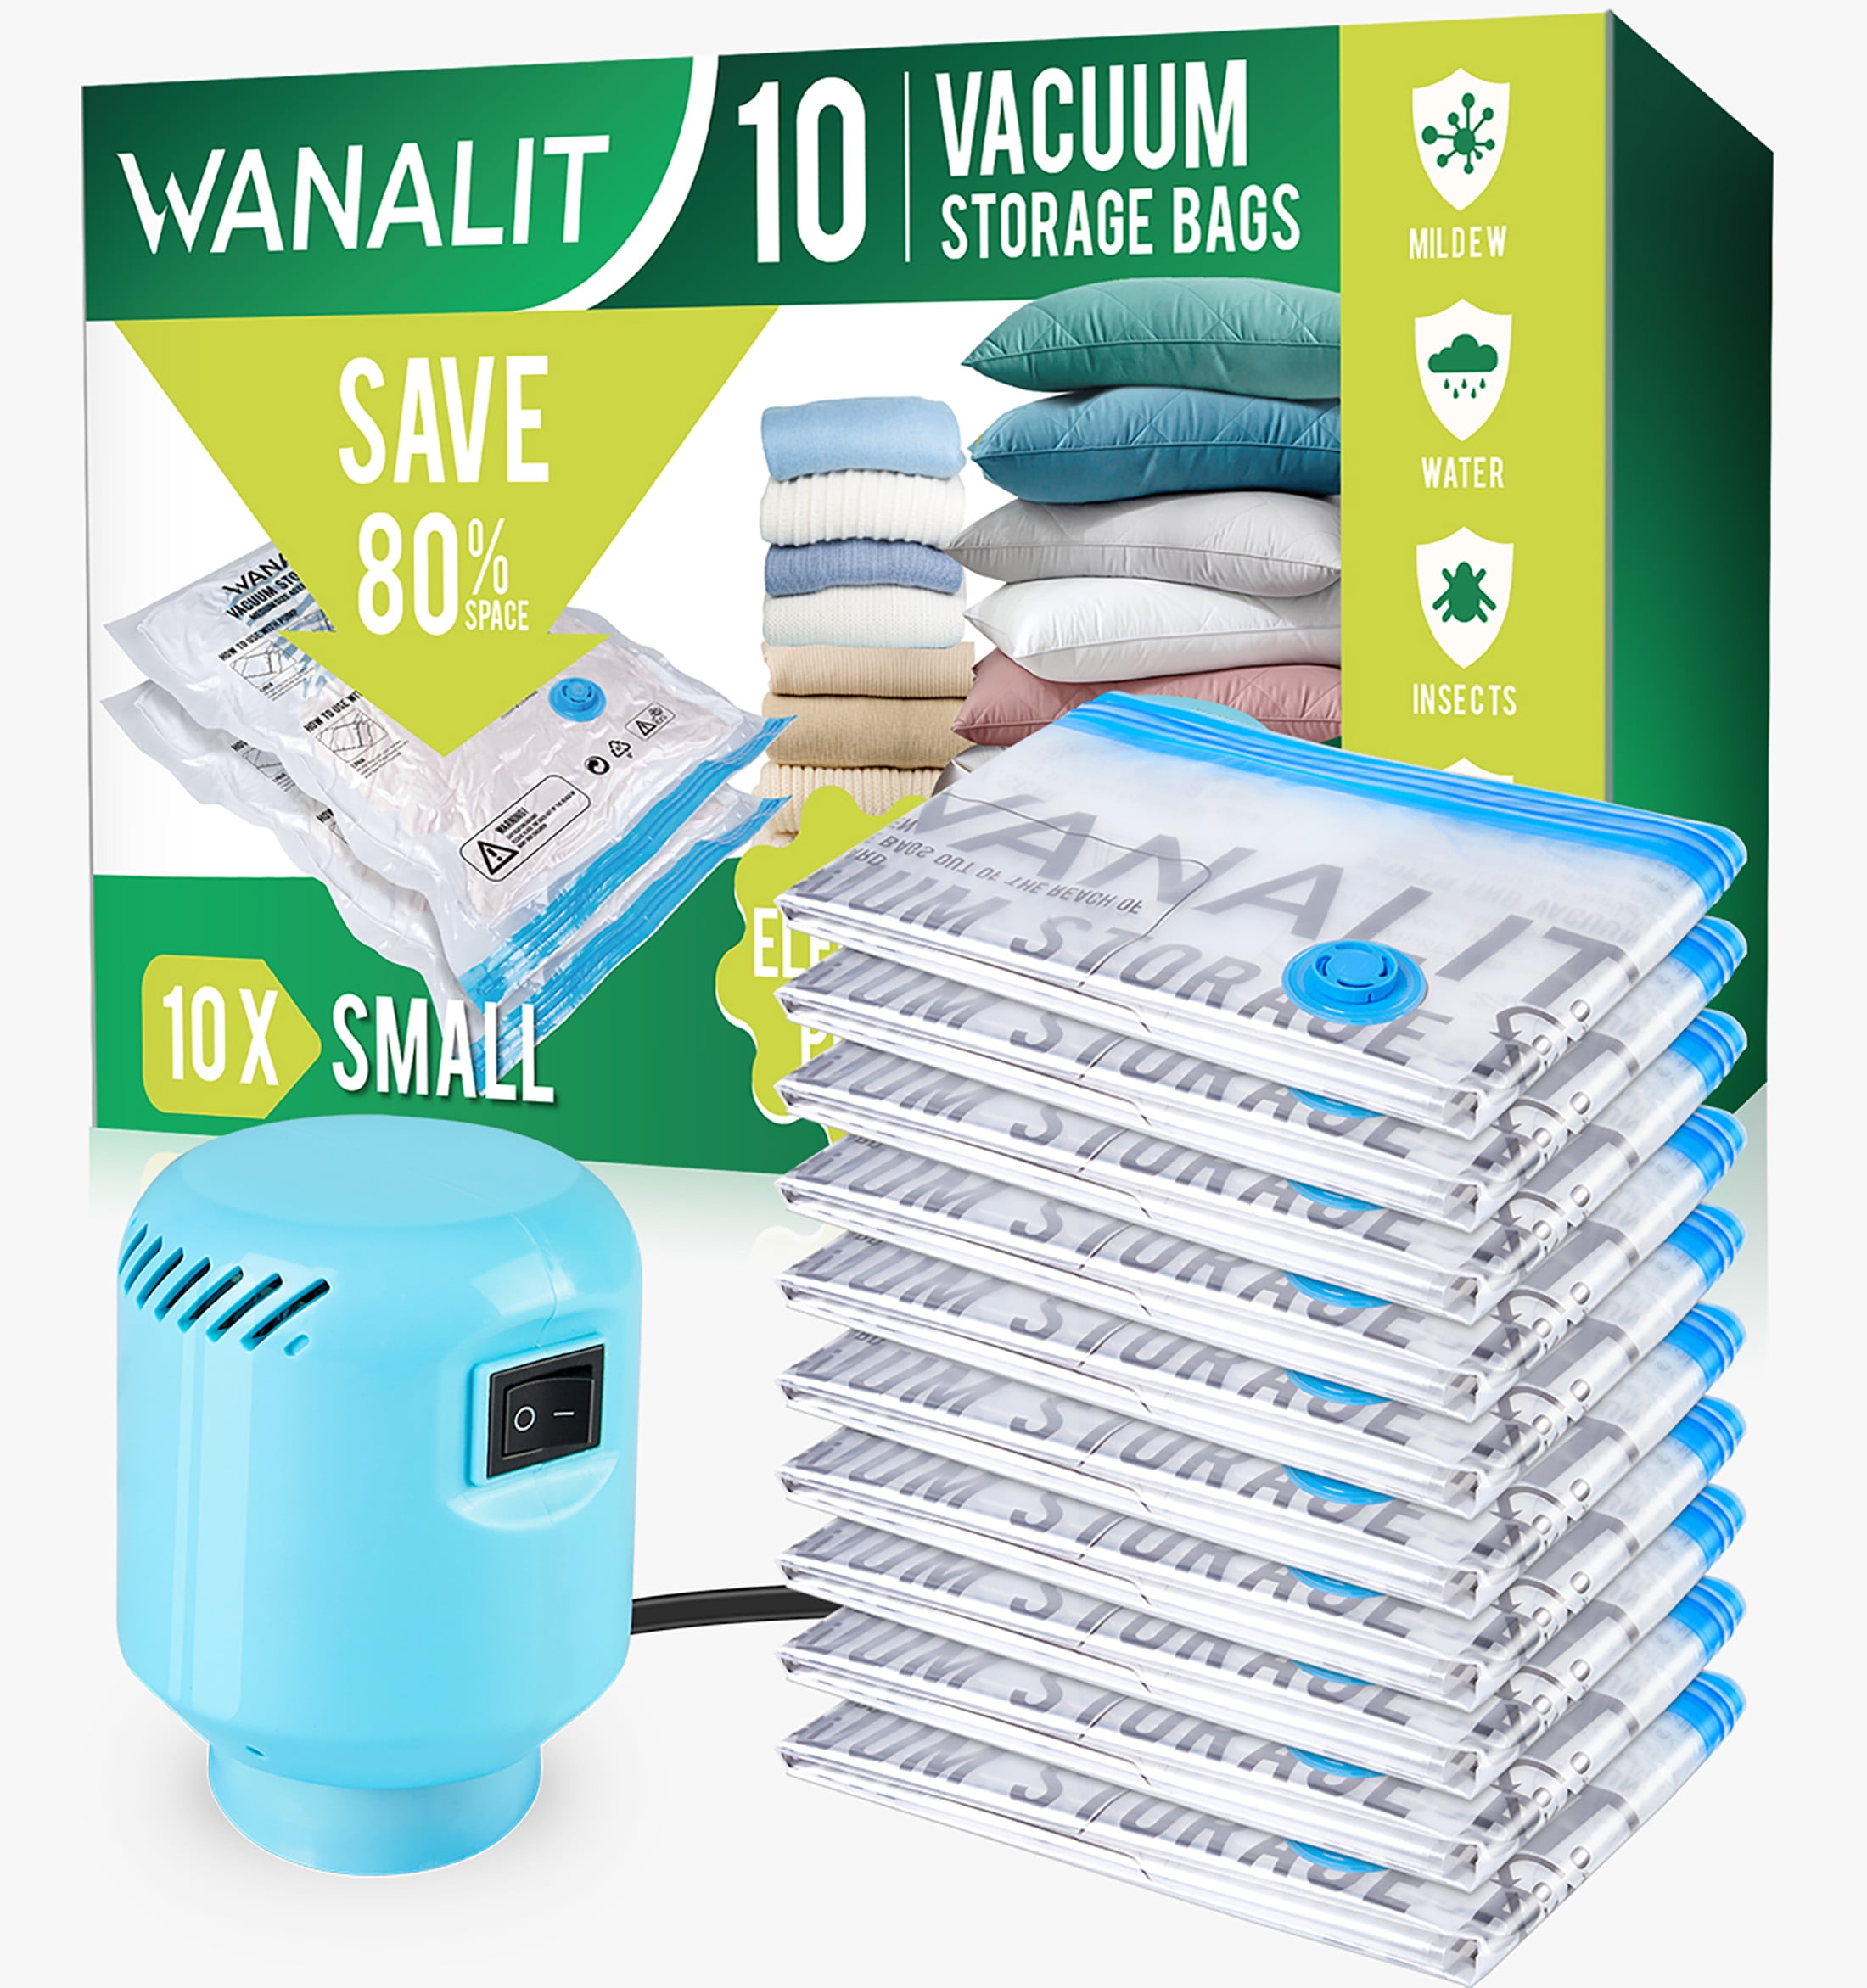 Wanalit Vacuum Storage Bags (10 Medium), Vacuum Sealer Compression Airtight Bags with Electric Pump, Space Saver Bags for Clothes, Bedding, Pillows